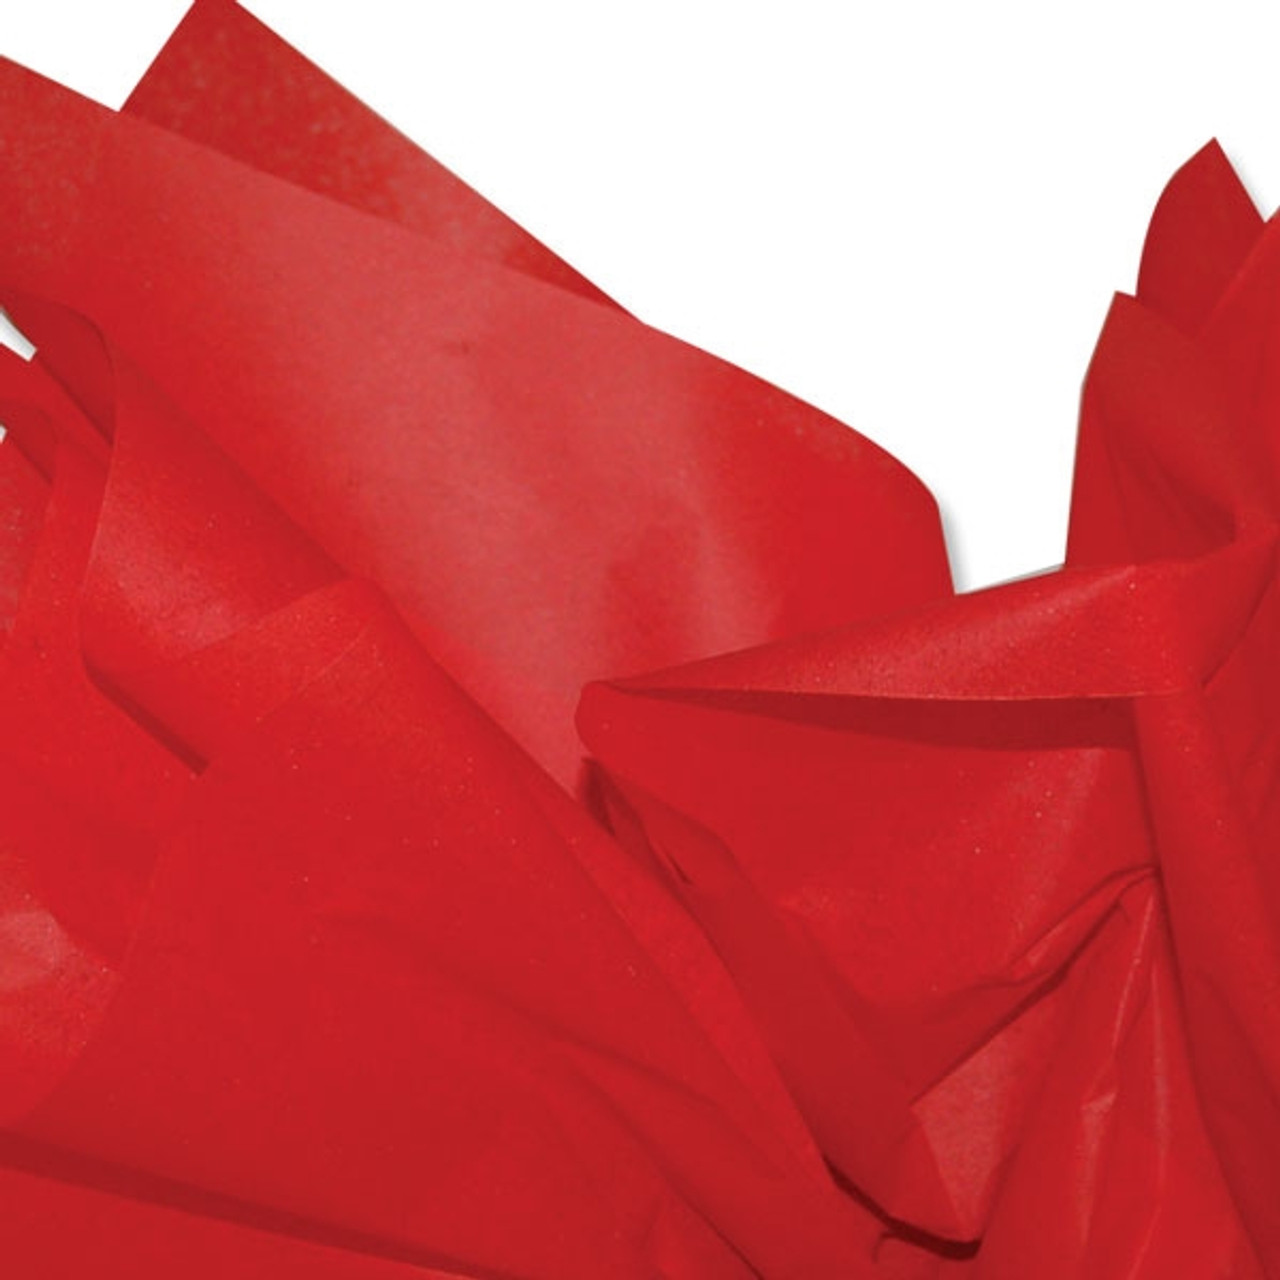 480 Sheets - 20 x 30 in. Red Tissue Paper Ream for Gift Wrapping and Packing